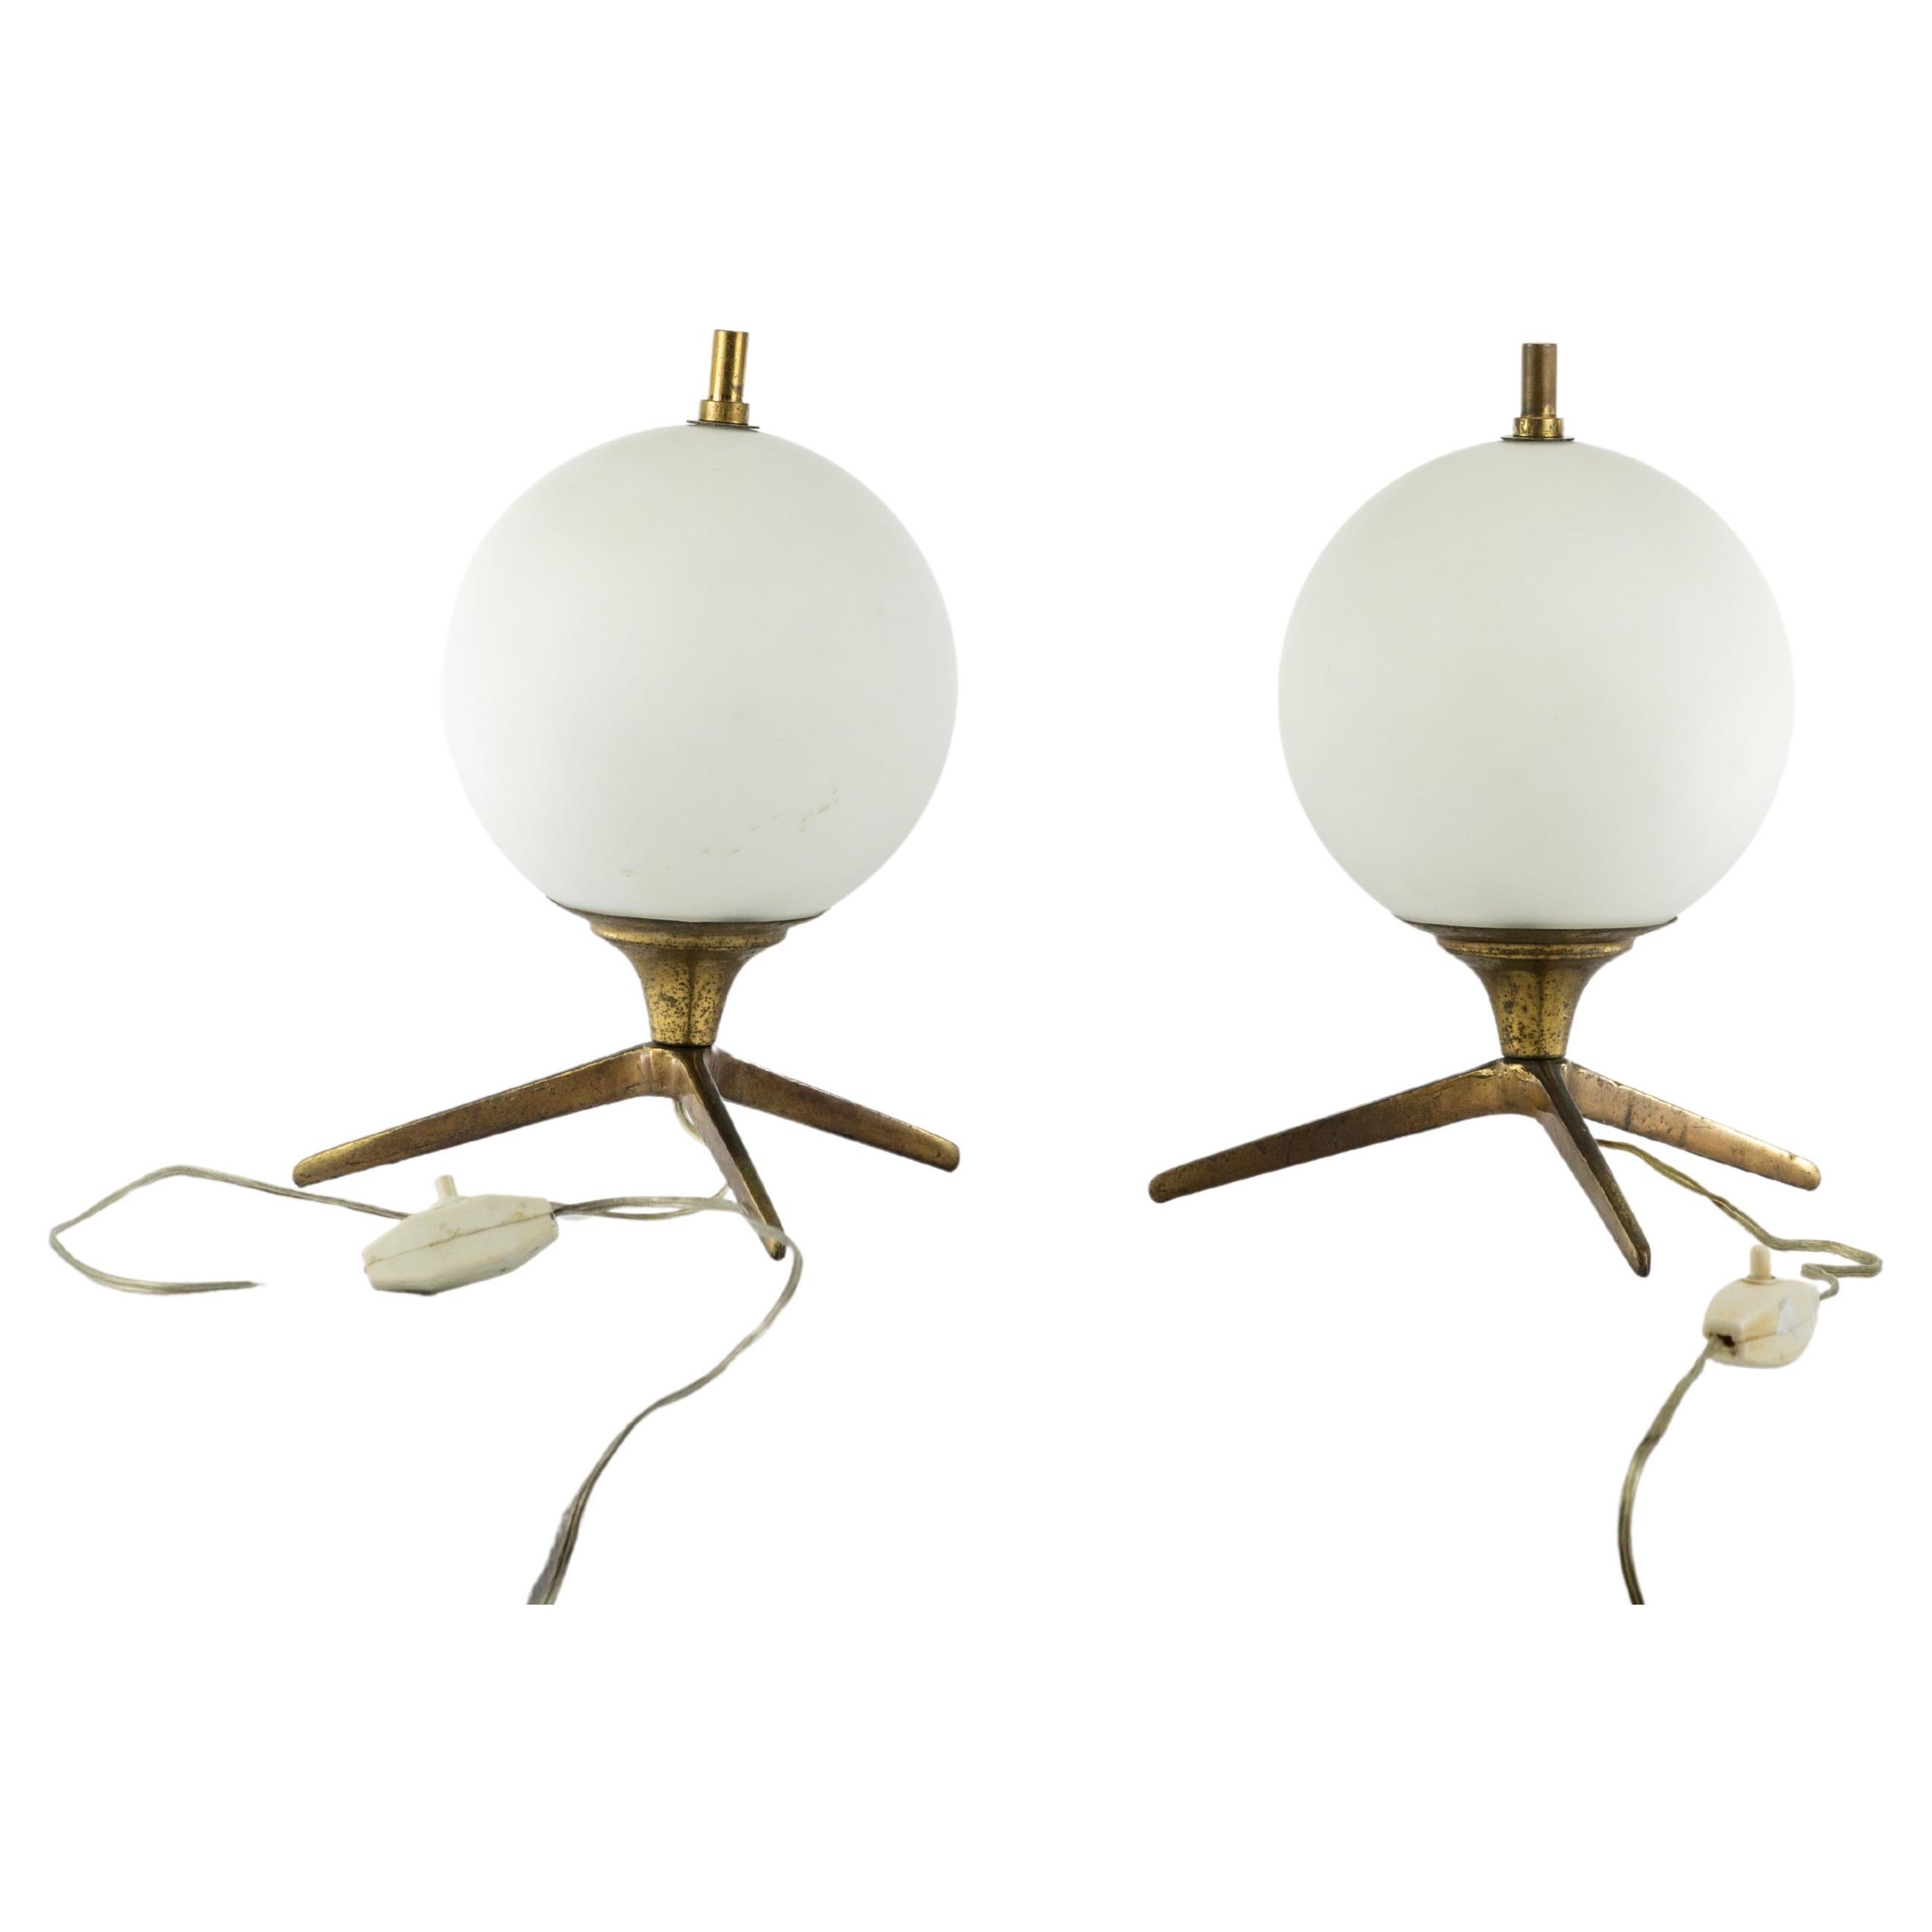 Stunning pair of table lamps in brass and opaline glass